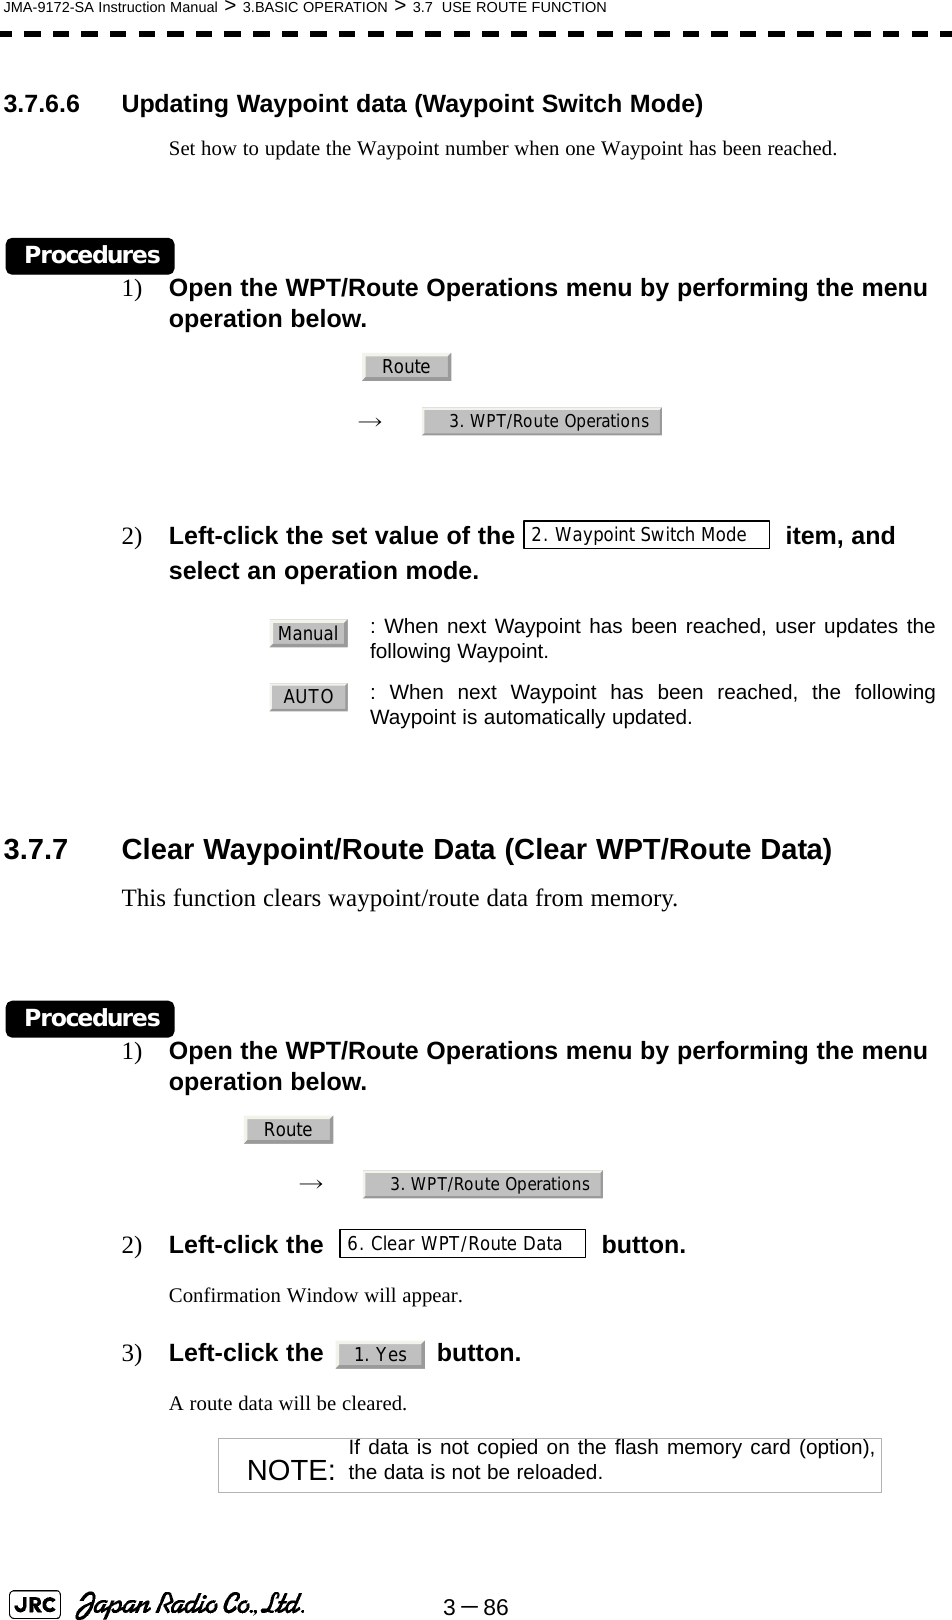 3－86JMA-9172-SA Instruction Manual &gt; 3.BASIC OPERATION &gt; 3.7  USE ROUTE FUNCTION3.7.6.6 Updating Waypoint data (Waypoint Switch Mode)Set how to update the Waypoint number when one Waypoint has been reached.Procedures1) Open the WPT/Route Operations menu by performing the menu operation below.　　 →　2) Left-click the set value of the  item, and select an operation mode.3.7.7 Clear Waypoint/Route Data (Clear WPT/Route Data)This function clears waypoint/route data from memory.Procedures1) Open the WPT/Route Operations menu by performing the menu operation below.→　2) Left-click the   button.Confirmation Window will appear.3) Left-click the   button.A route data will be cleared. : When next Waypoint has been reached, user updates thefollowing Waypoint.  : When next Waypoint has been reached, the followingWaypoint is automatically updated.NOTE: If data is not copied on the flash memory card (option),the data is not be reloaded.Route3. WPT/Route Operations2. Waypoint Switch ModeManualAUTORoute3. WPT/Route Operations6. Clear WPT/Route Data1. Yes